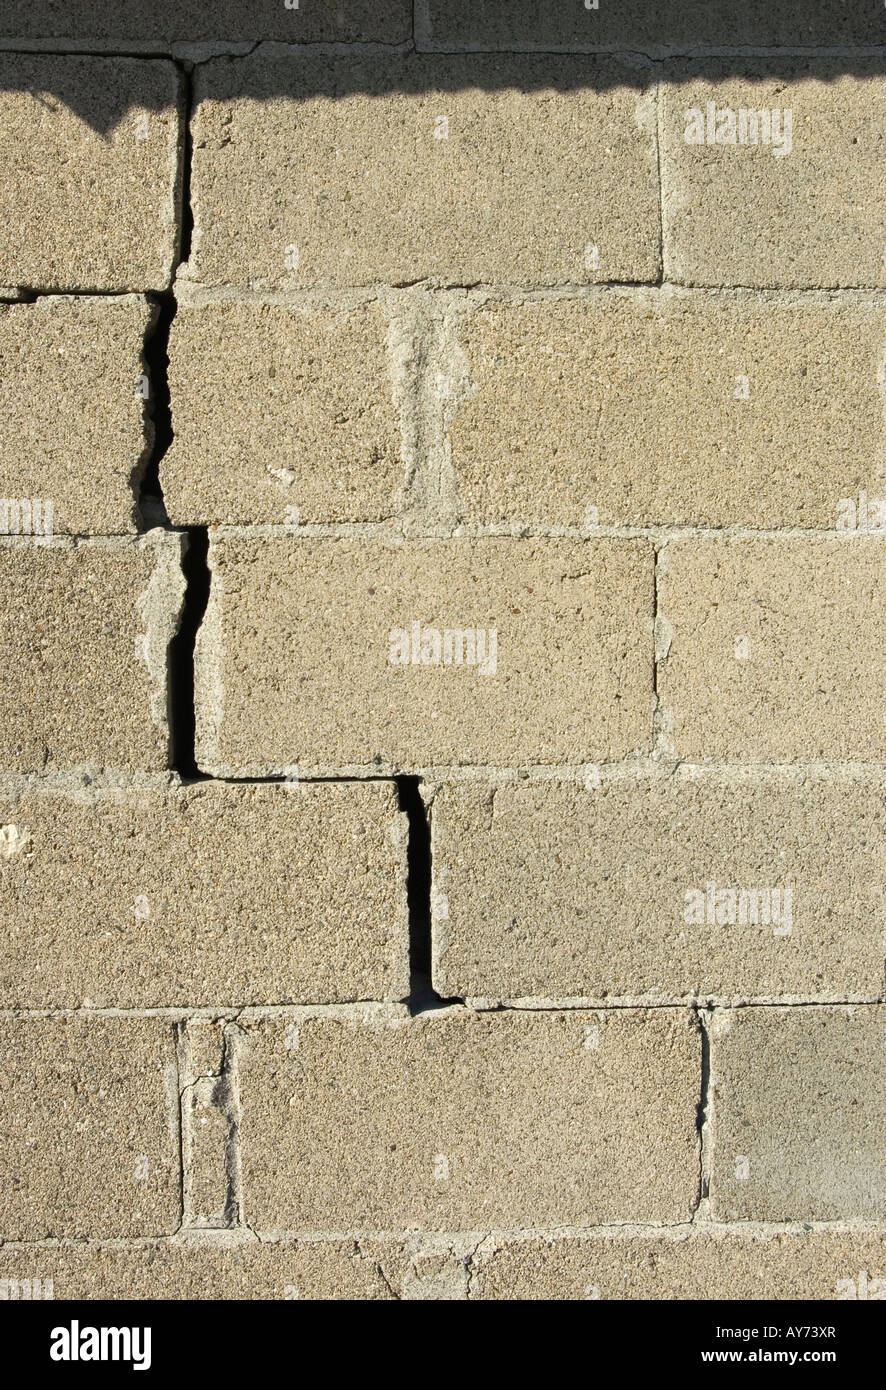 Large stepped crack in a cement block wall Stock Photo - Alamy